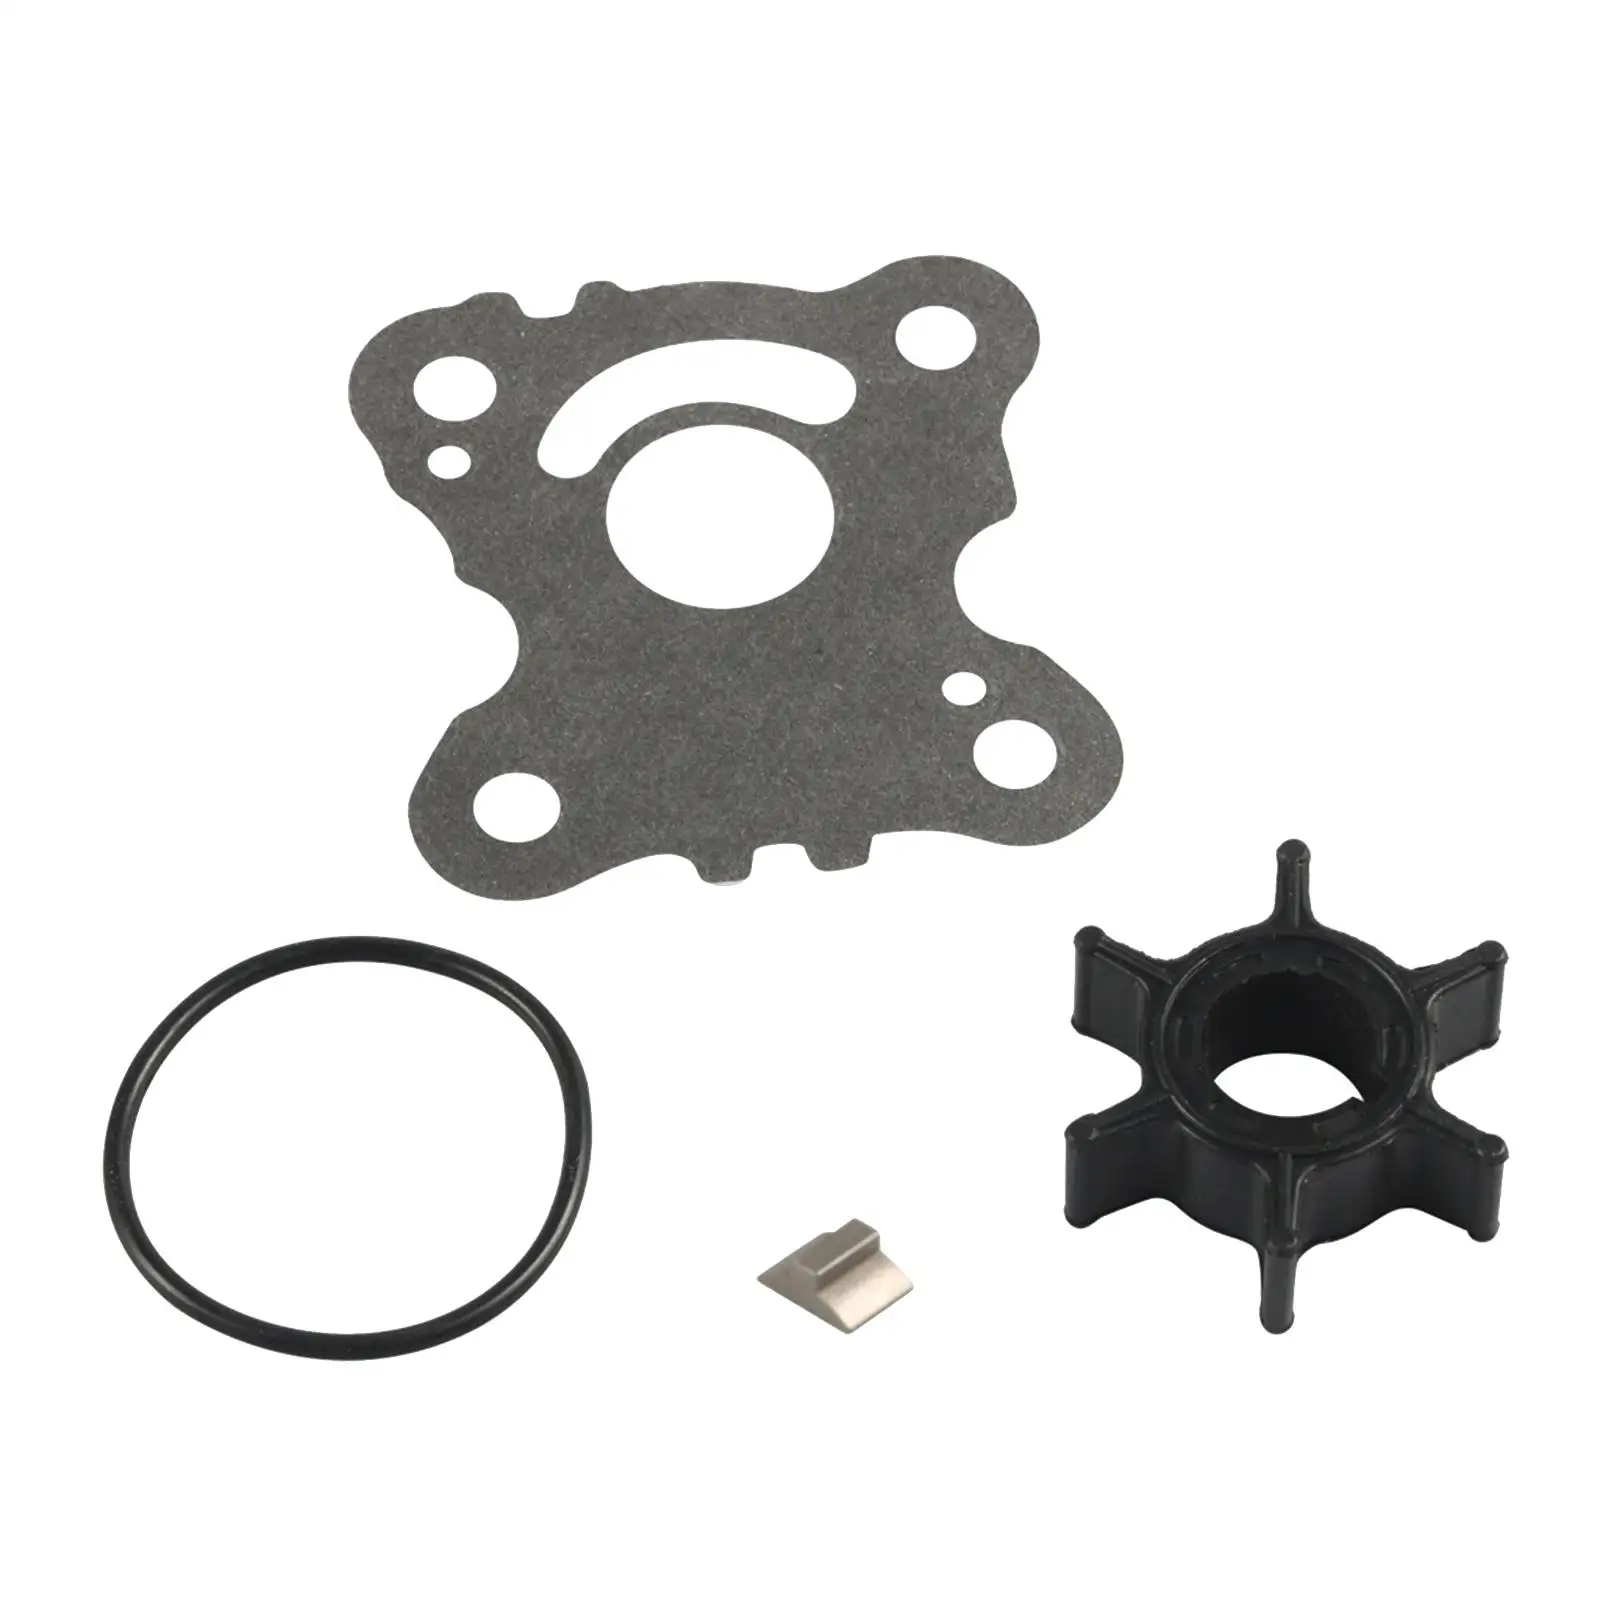 Water Pump Impeller Repair Kit 06192-zw9-a30 Durable for Honda Outboard